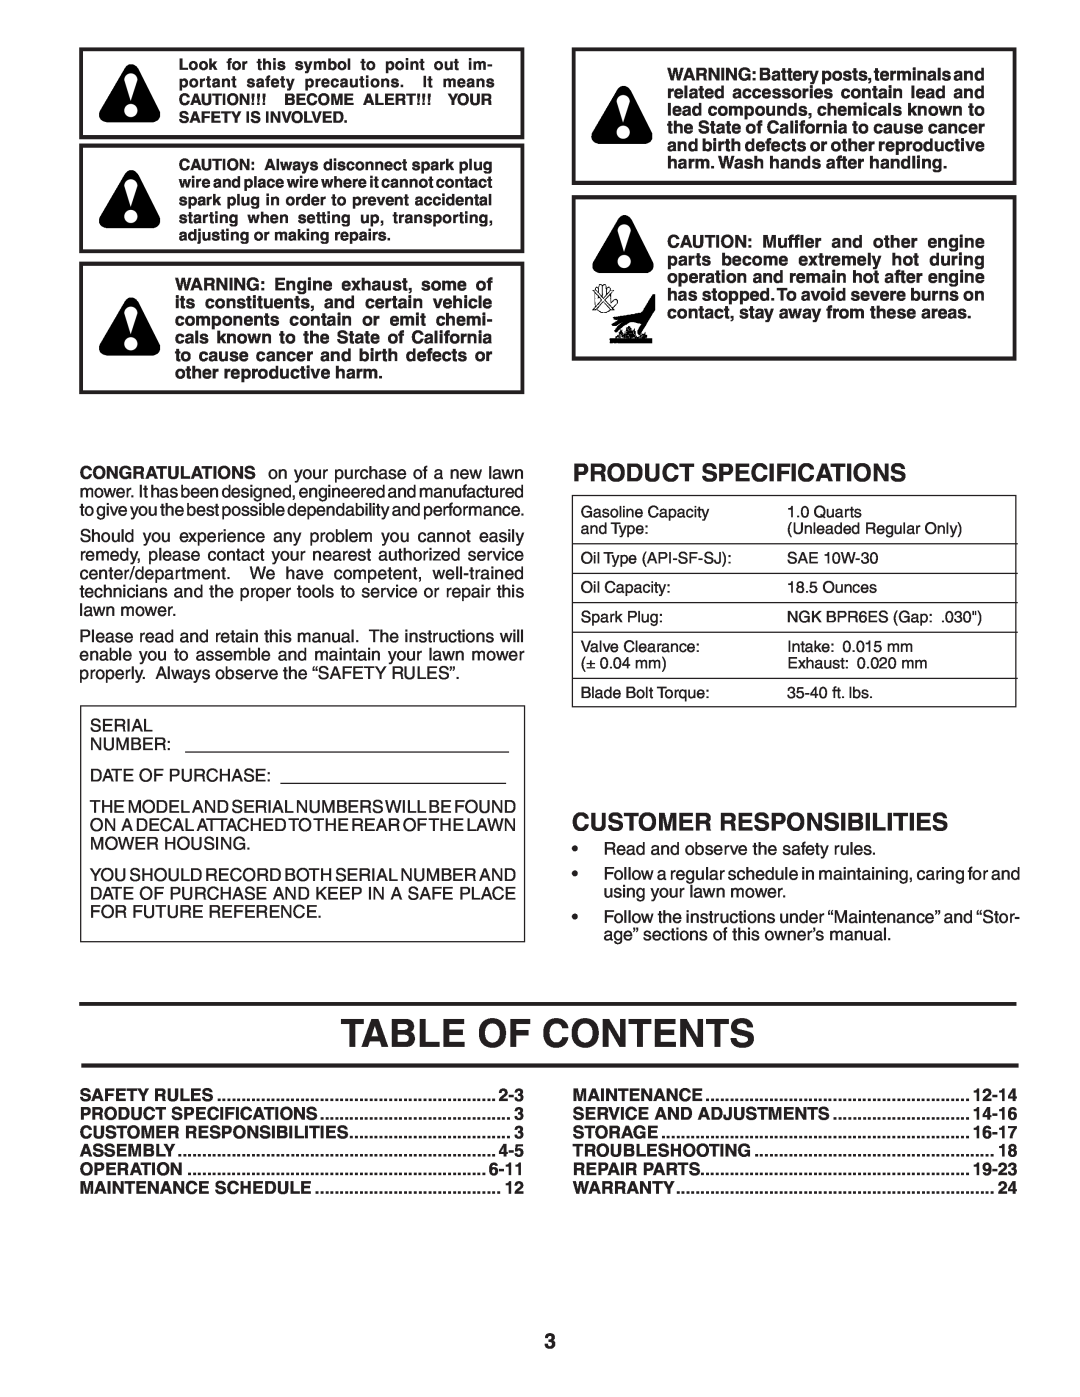 Husqvarna 917.374781 (65RSW21HVB) owner manual Table Of Contents, Product Specifications, Customer Responsibilities 